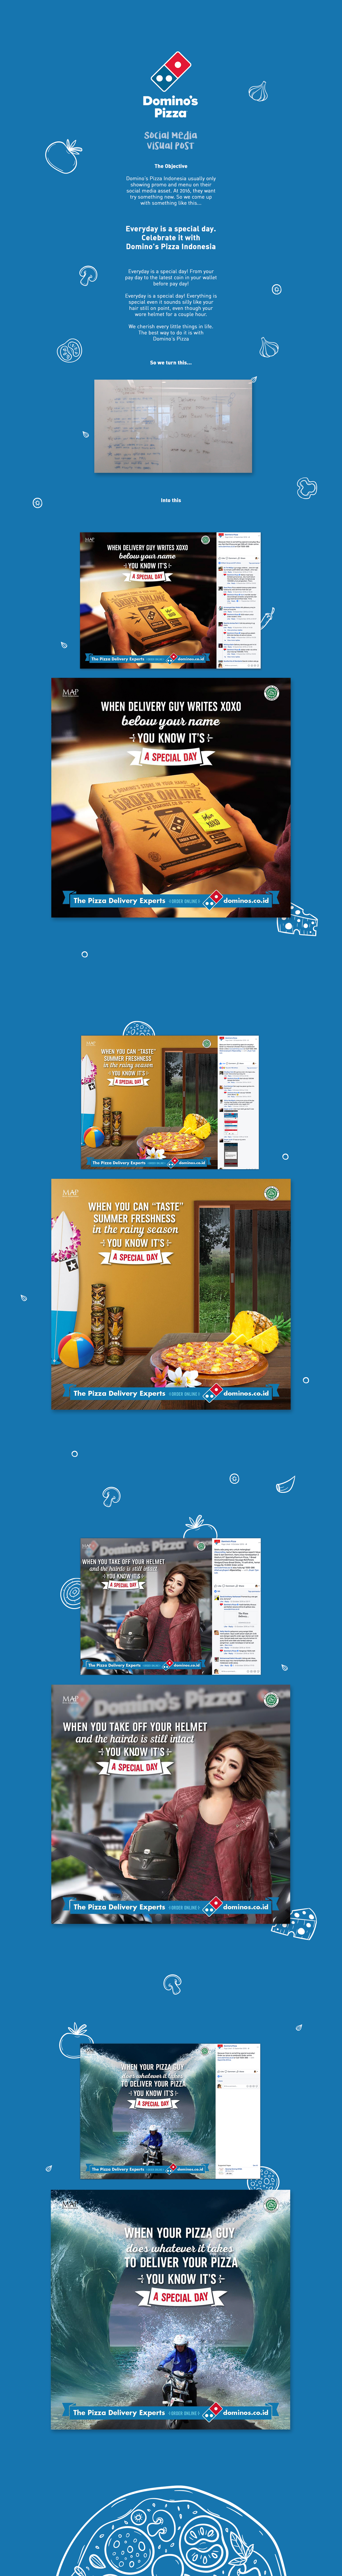 Pizza concept funny indonesia digital imaging  joke special Day